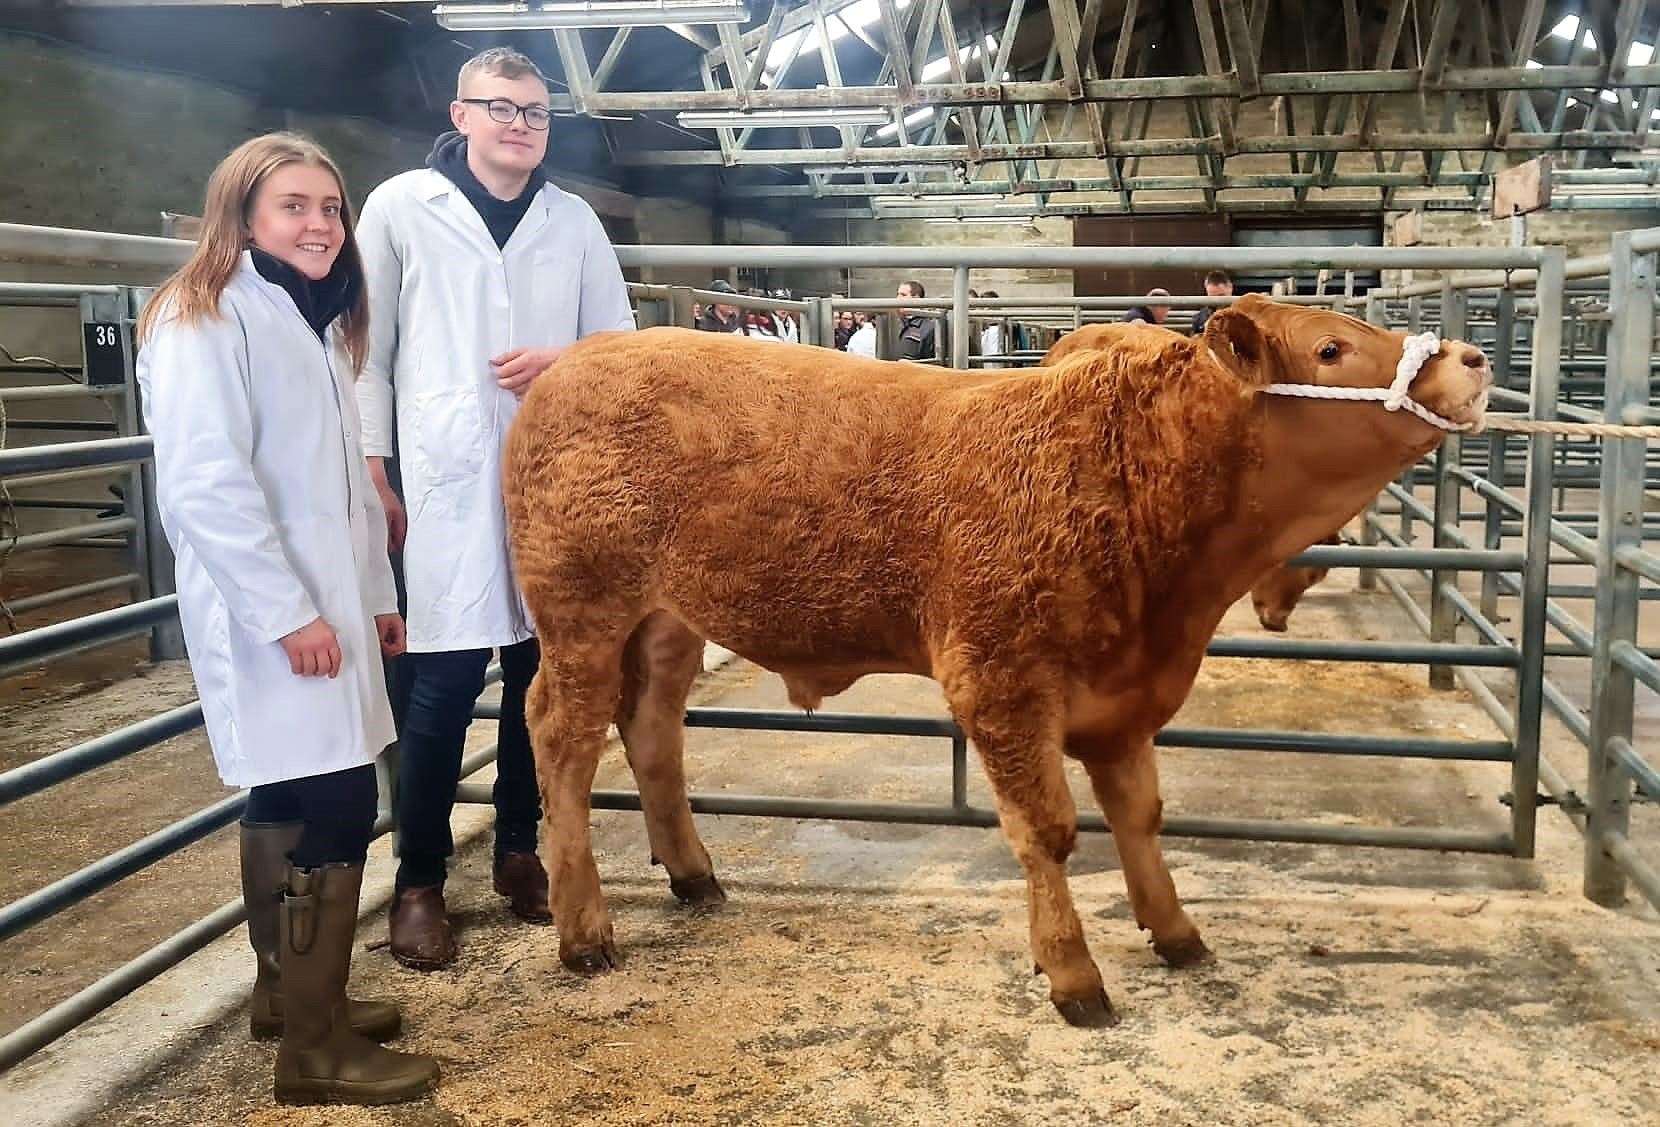 Senior winners of the Beef Cattle Dressing Competition are, from left, Hannah Lorimer and Craig Coutts with their calf.